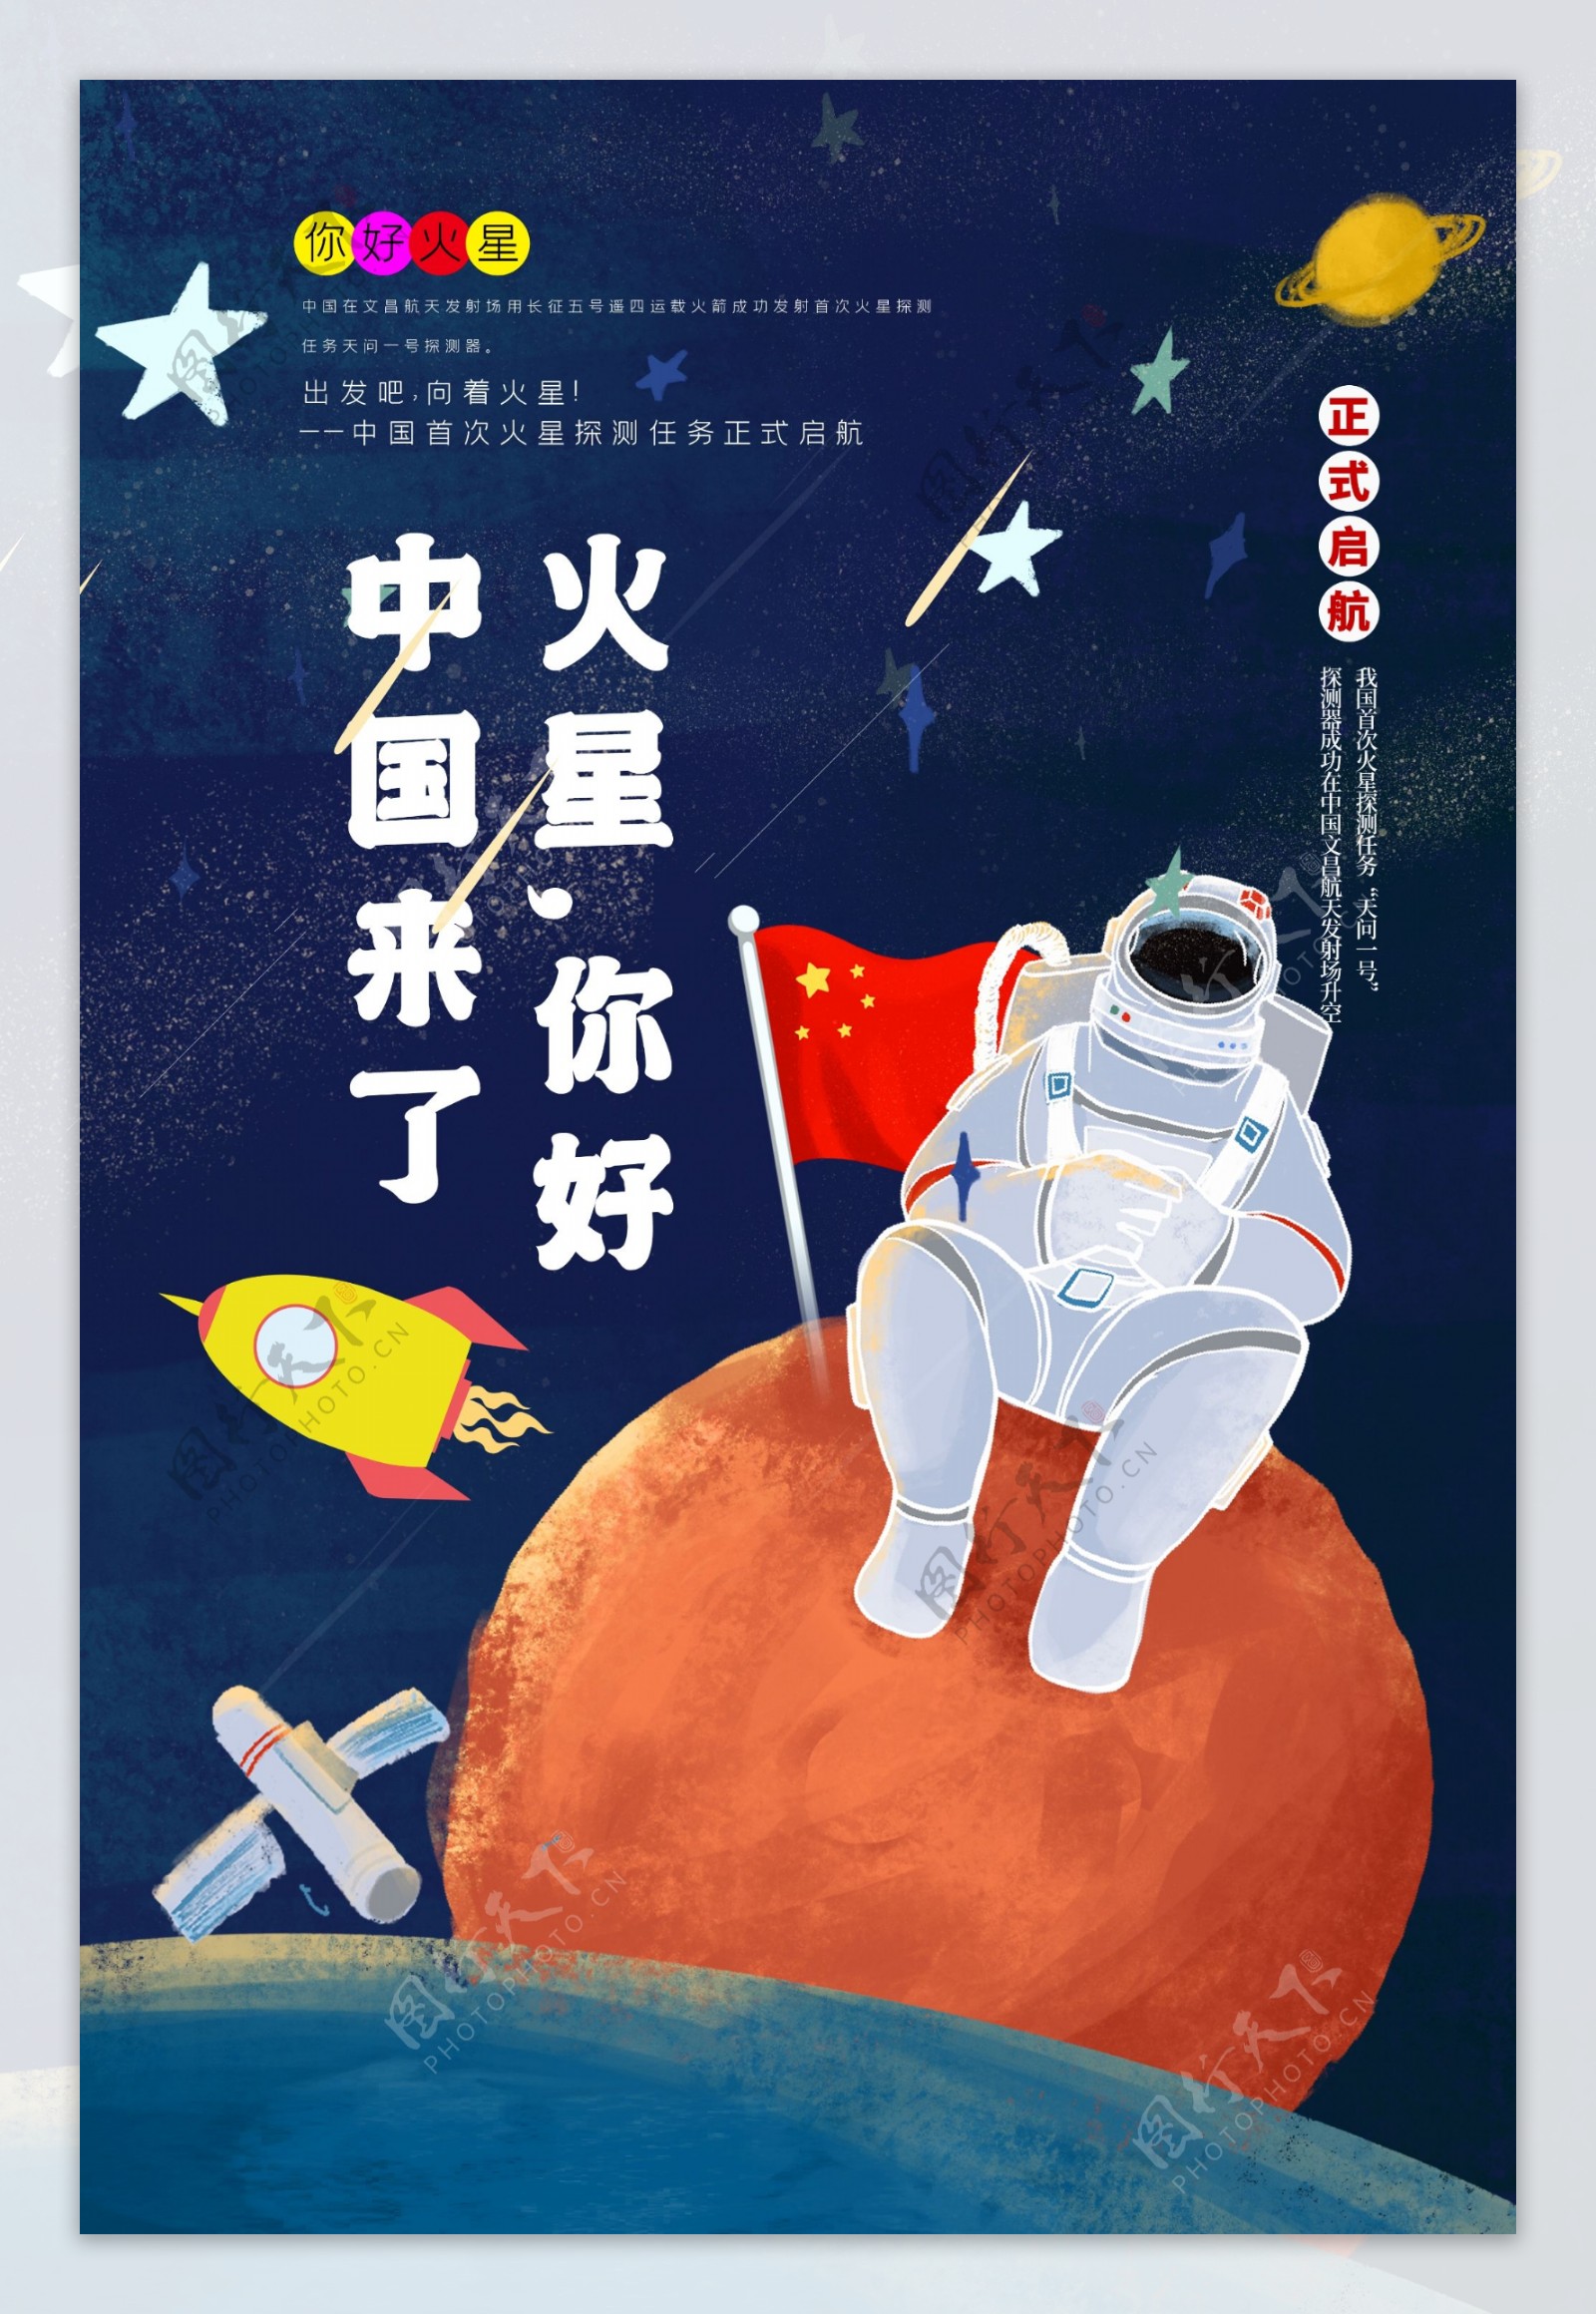 火星